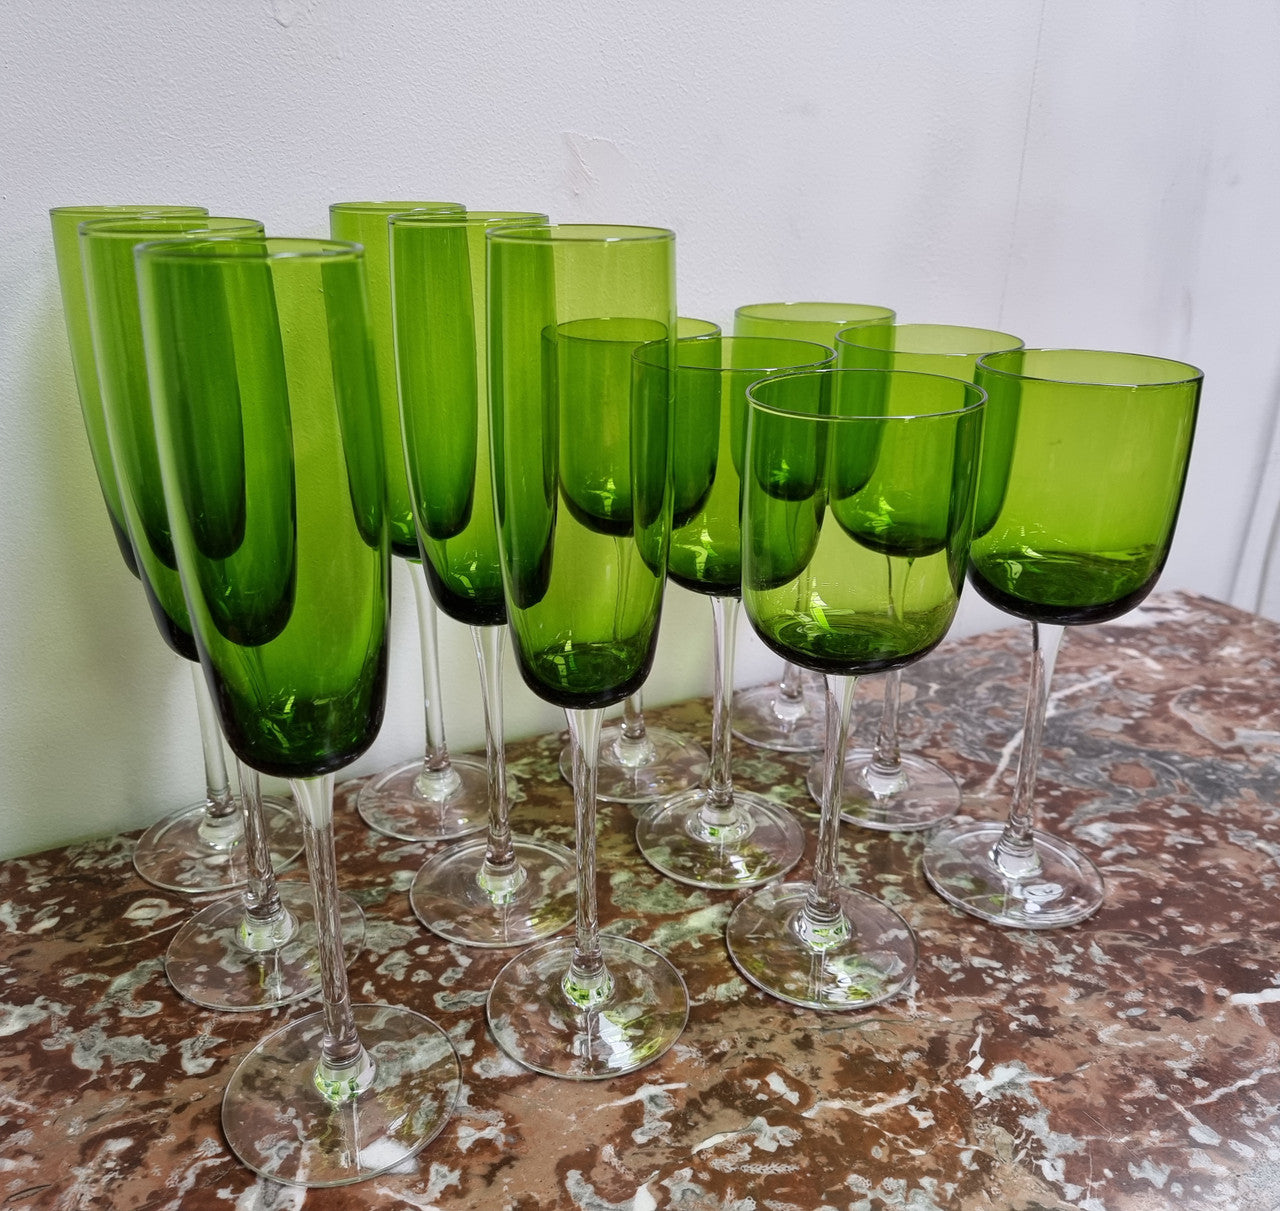 Beautiful set of 12 Vintage emerald green hand made wine glasses. Possibly Italian or French. They are in good original condition with no chips or cracks.